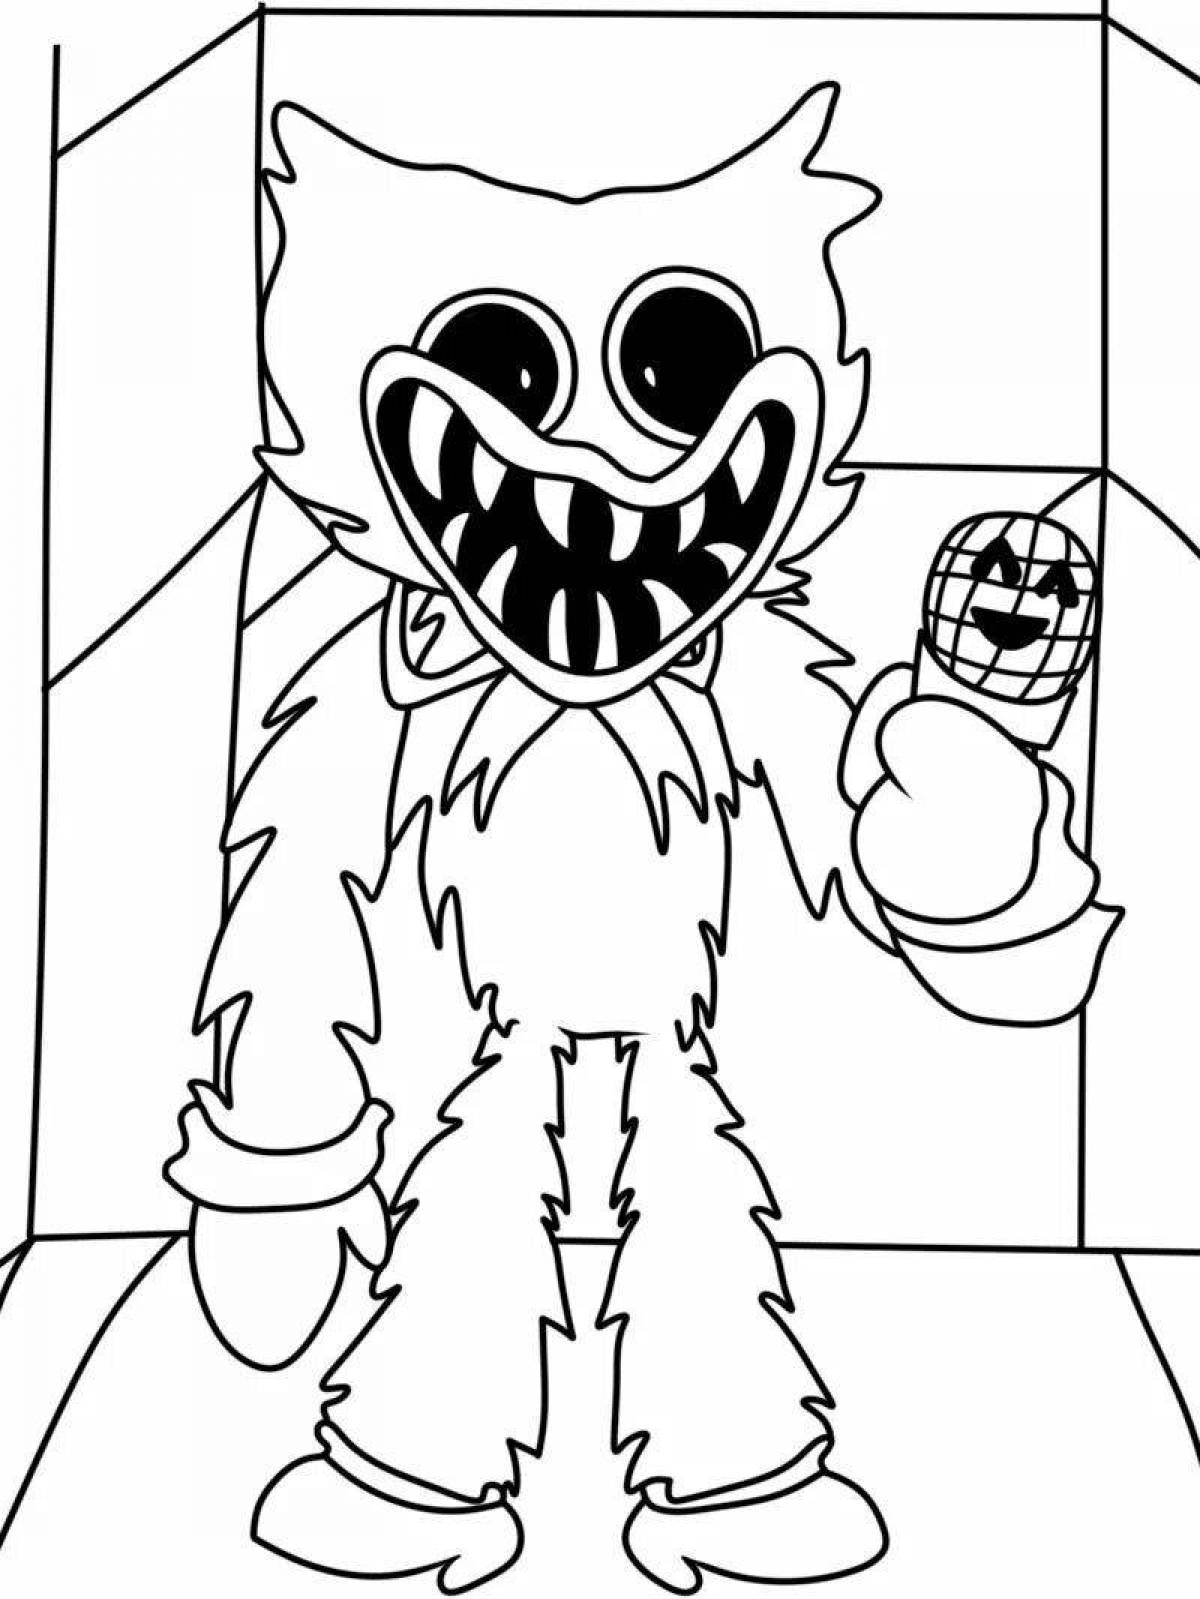 Playful kissy missions coloring page